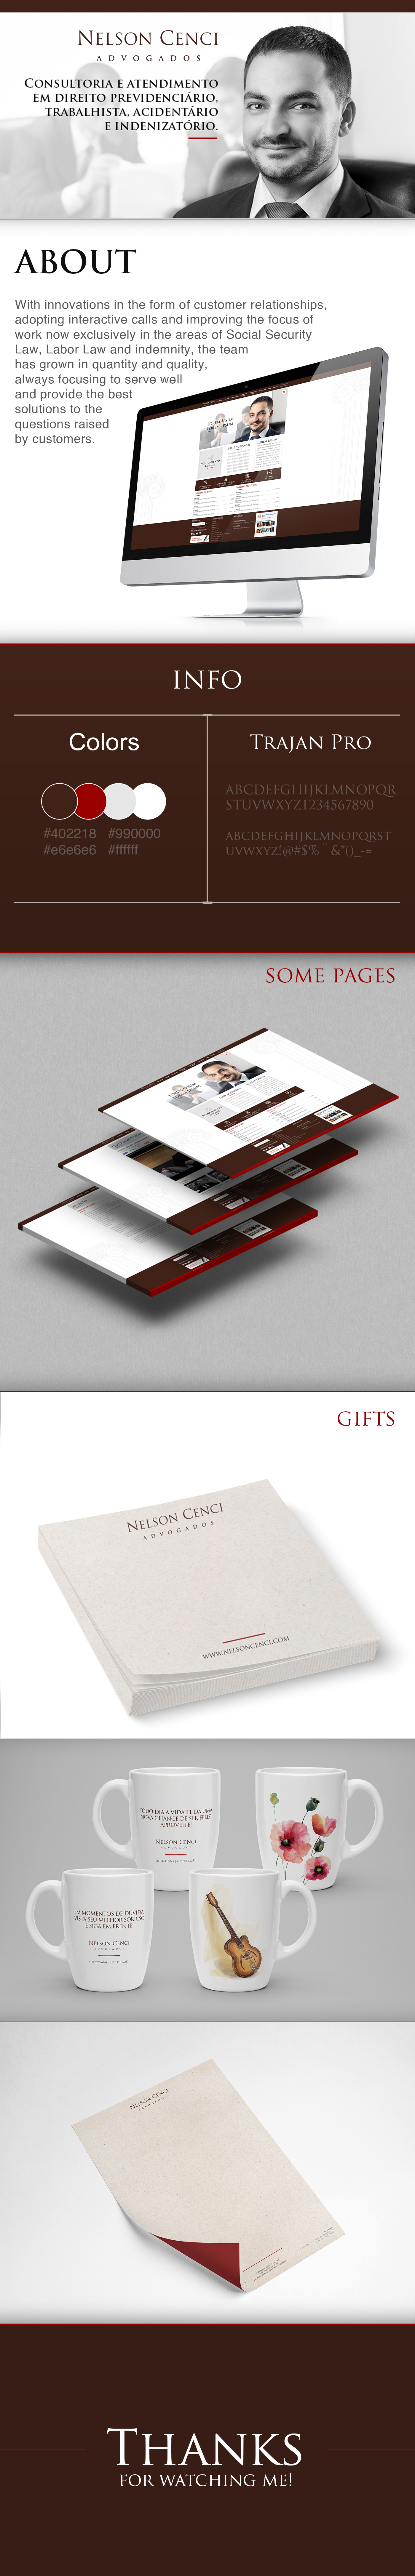 Web lawyer gifts design